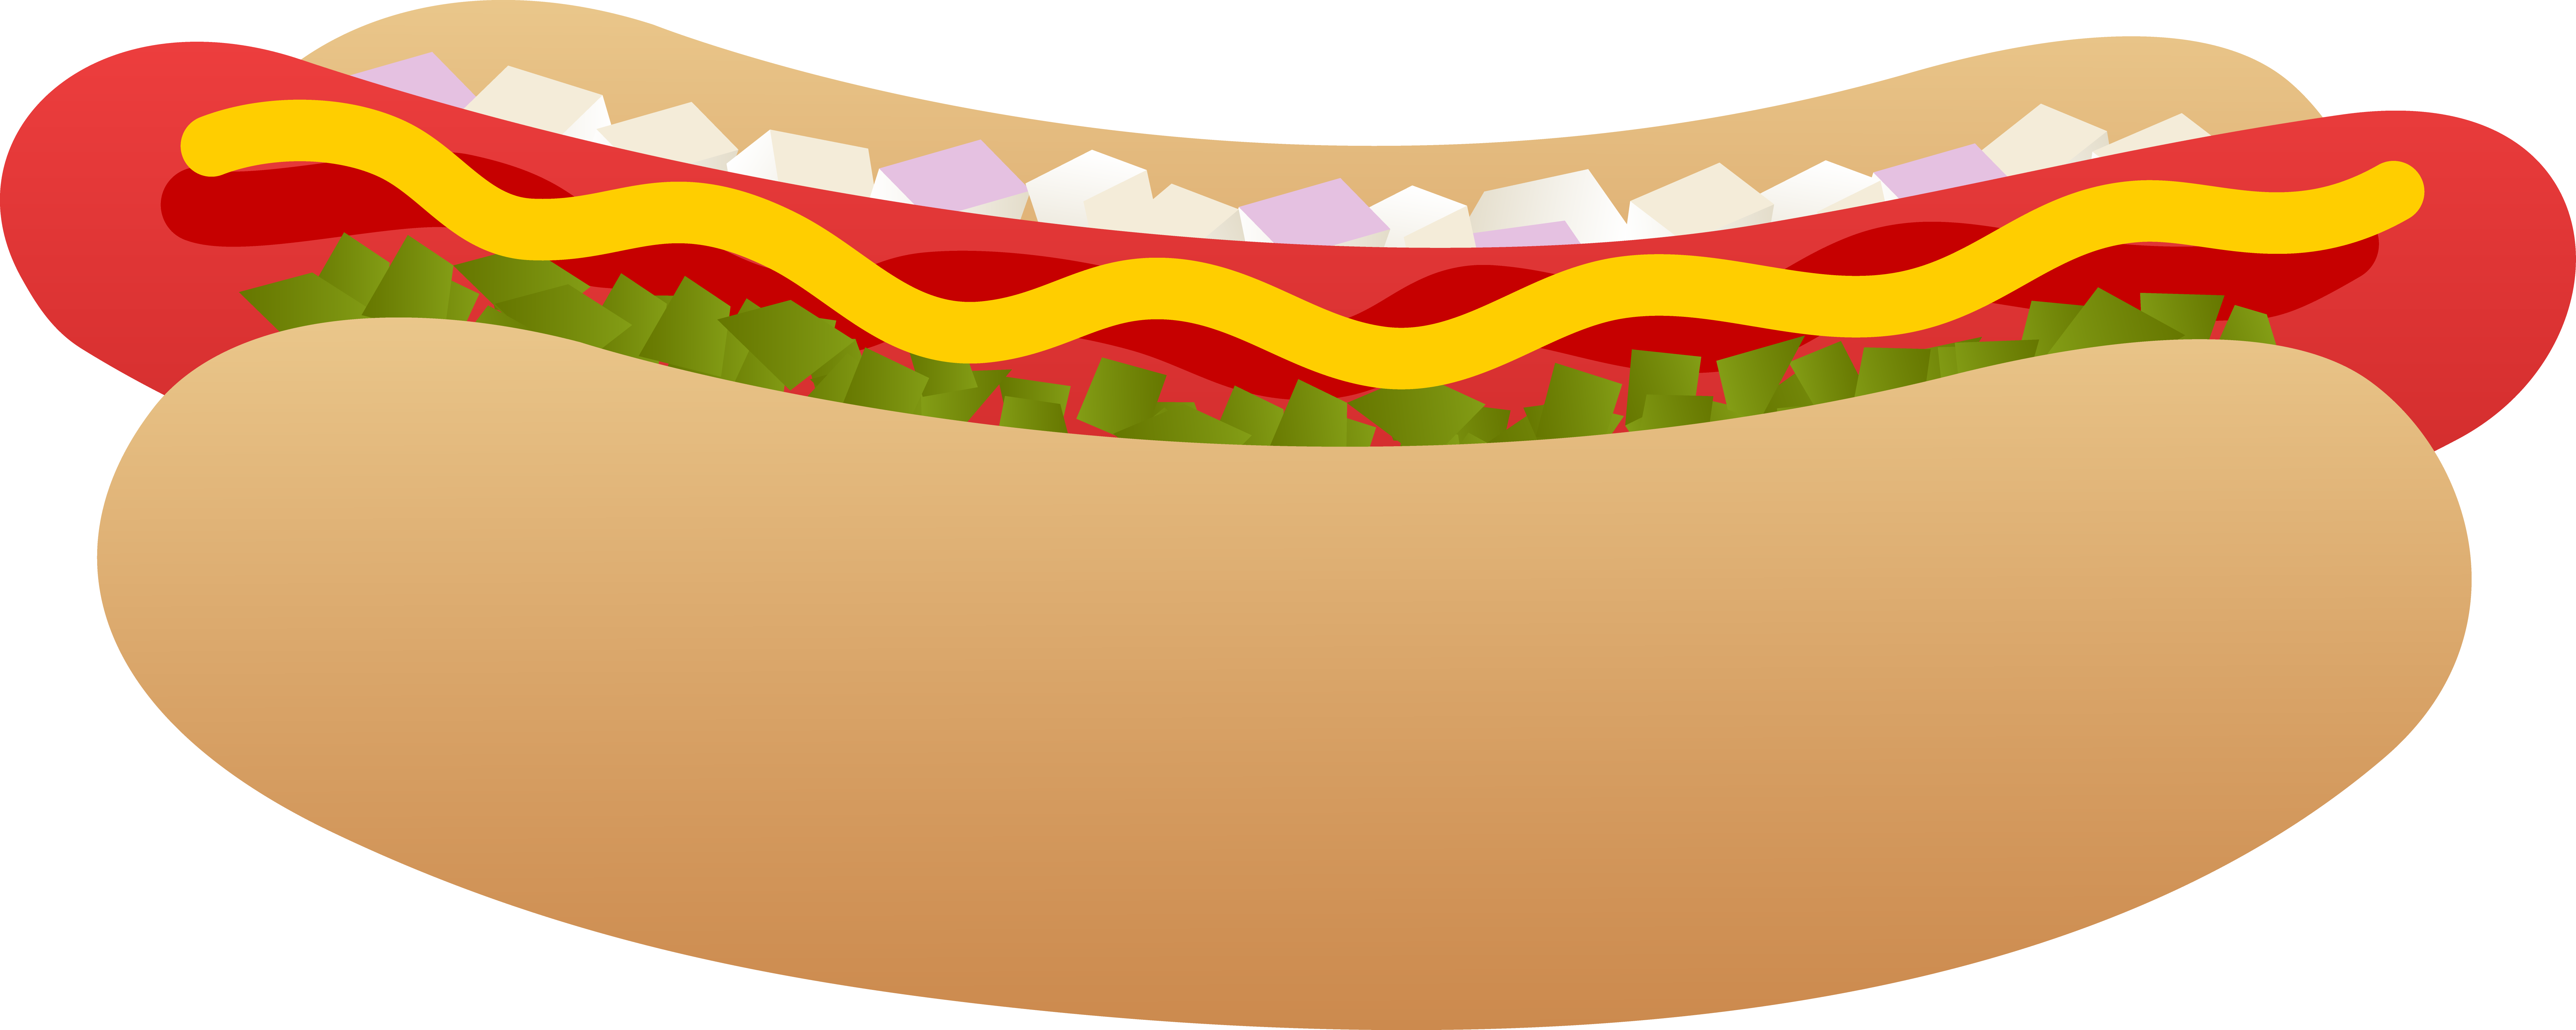 Images For > Sausage Clipart